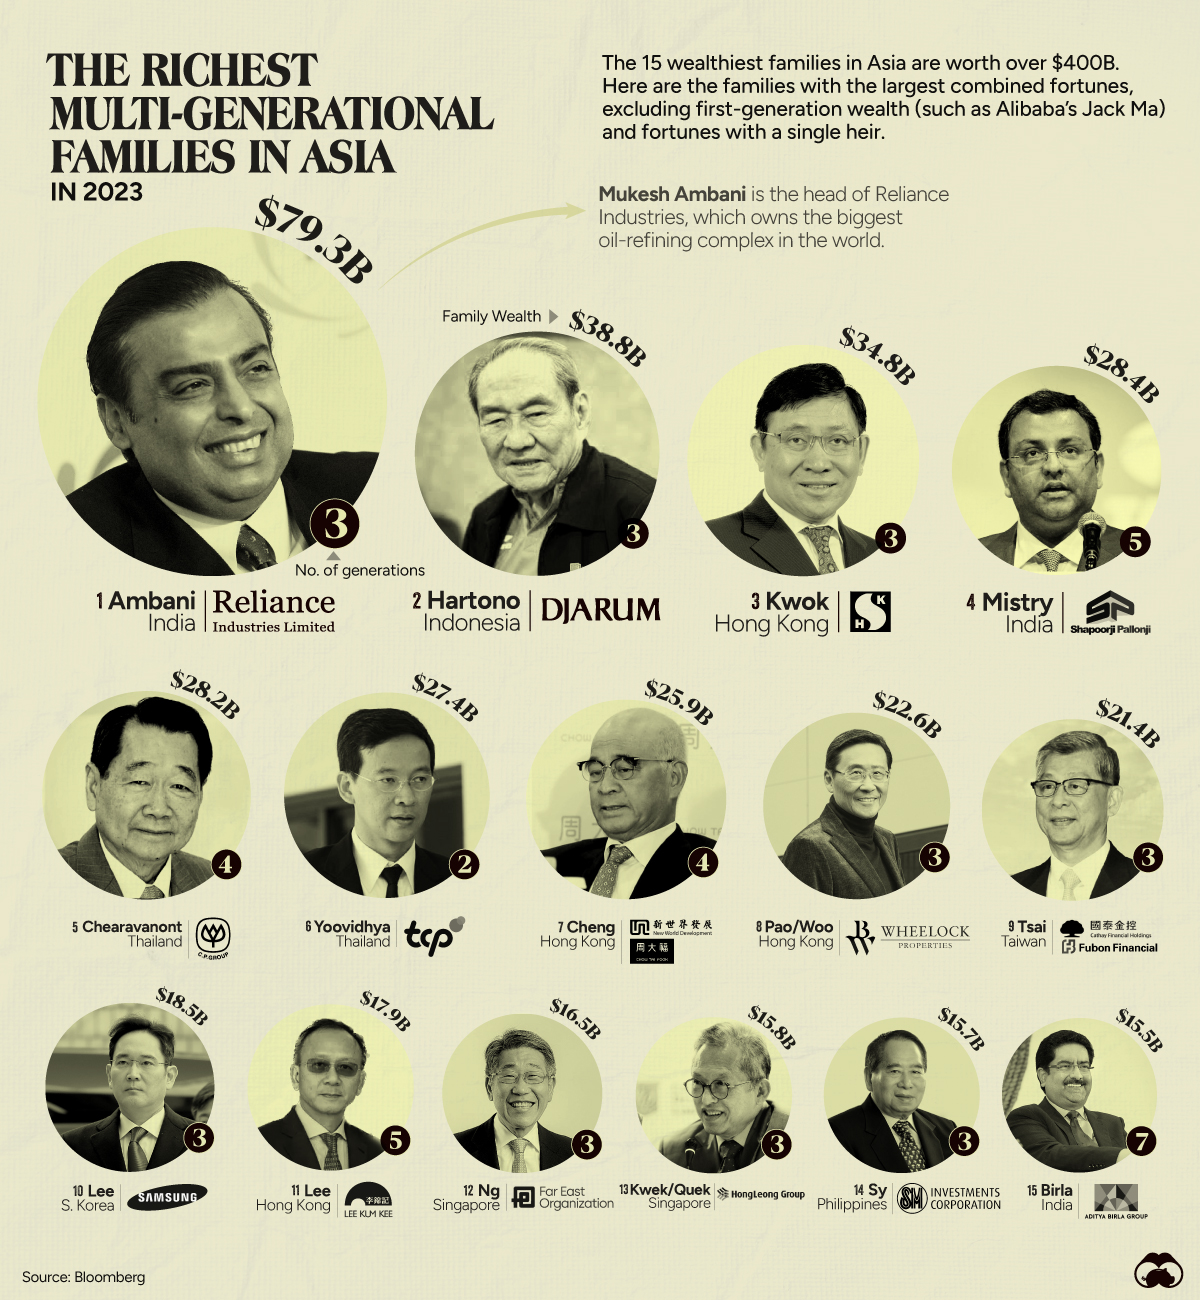 The 15 Richest Multi-Generational Families in Asia